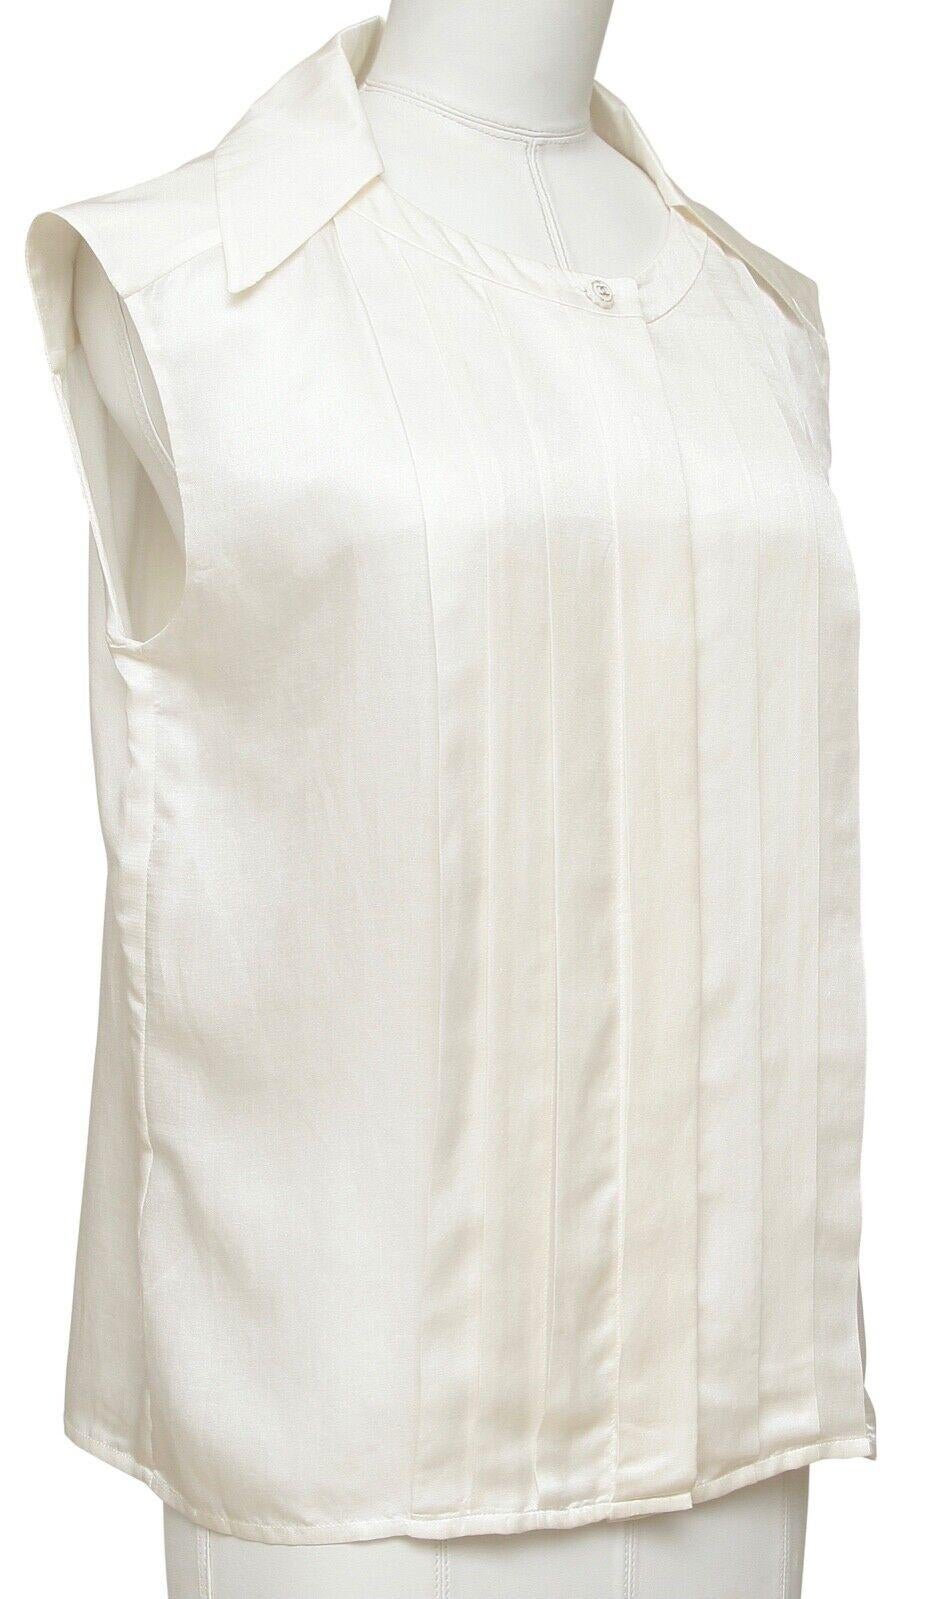 GUARANTEED AUTHENTIC CHANEL SLEEVELESS IVORY BUTTON DOWN SHIRT

Design:
 - Sleeveless lightweight ivory top.
 - CC button at neckline, remainder of buttons covered down front.
 - Vertical pleats front and back.
 - Pointed collar.

Material: 63%